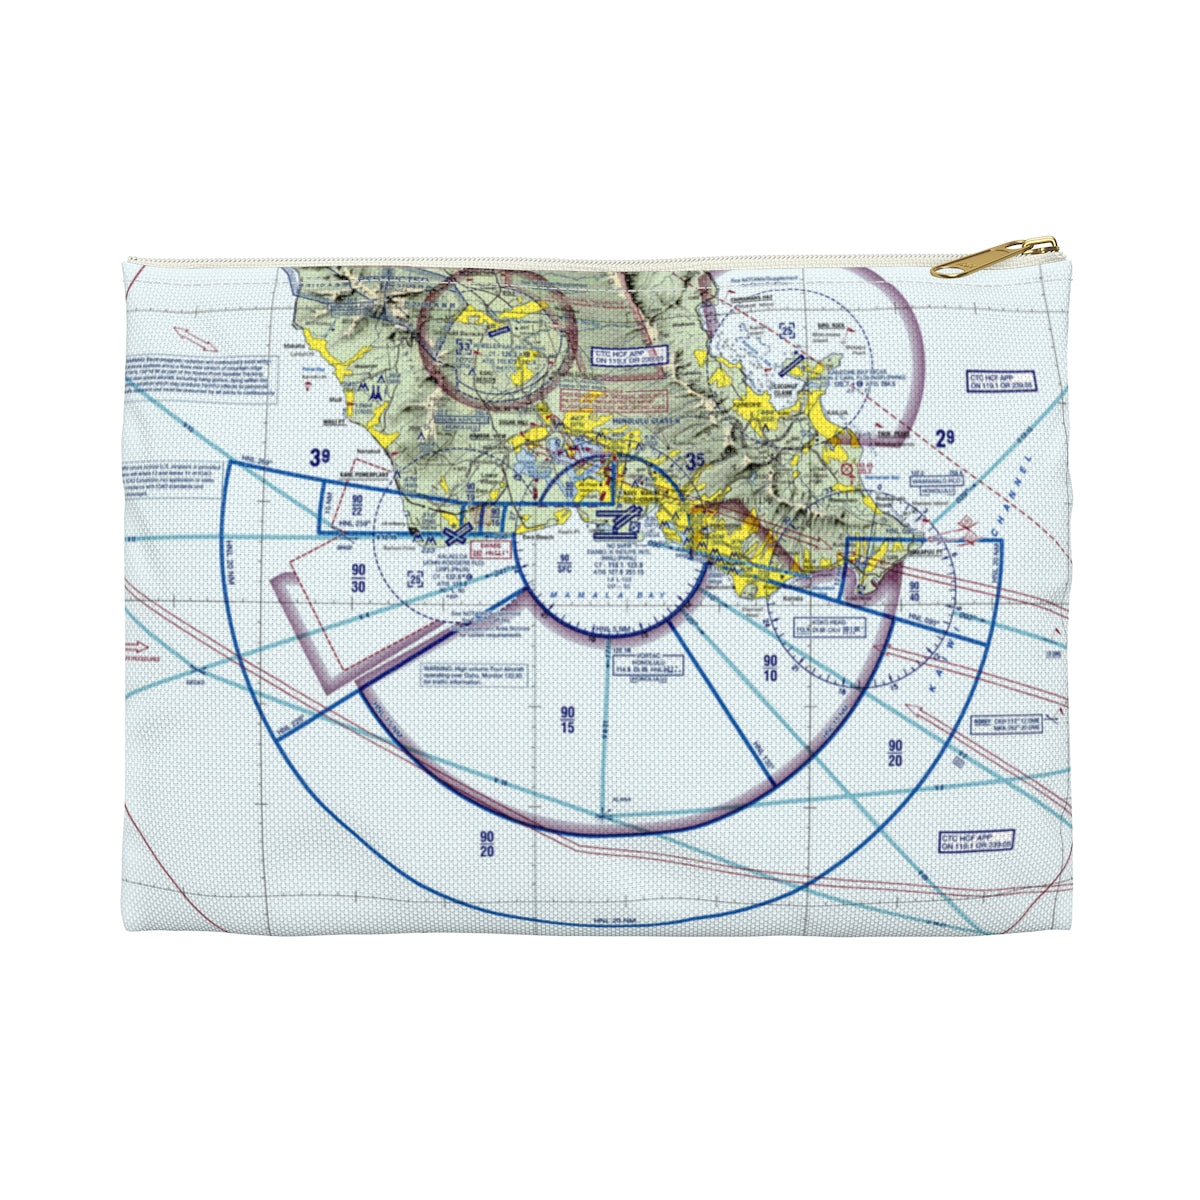 Honolulu Sectional Chart Accessory Pouch